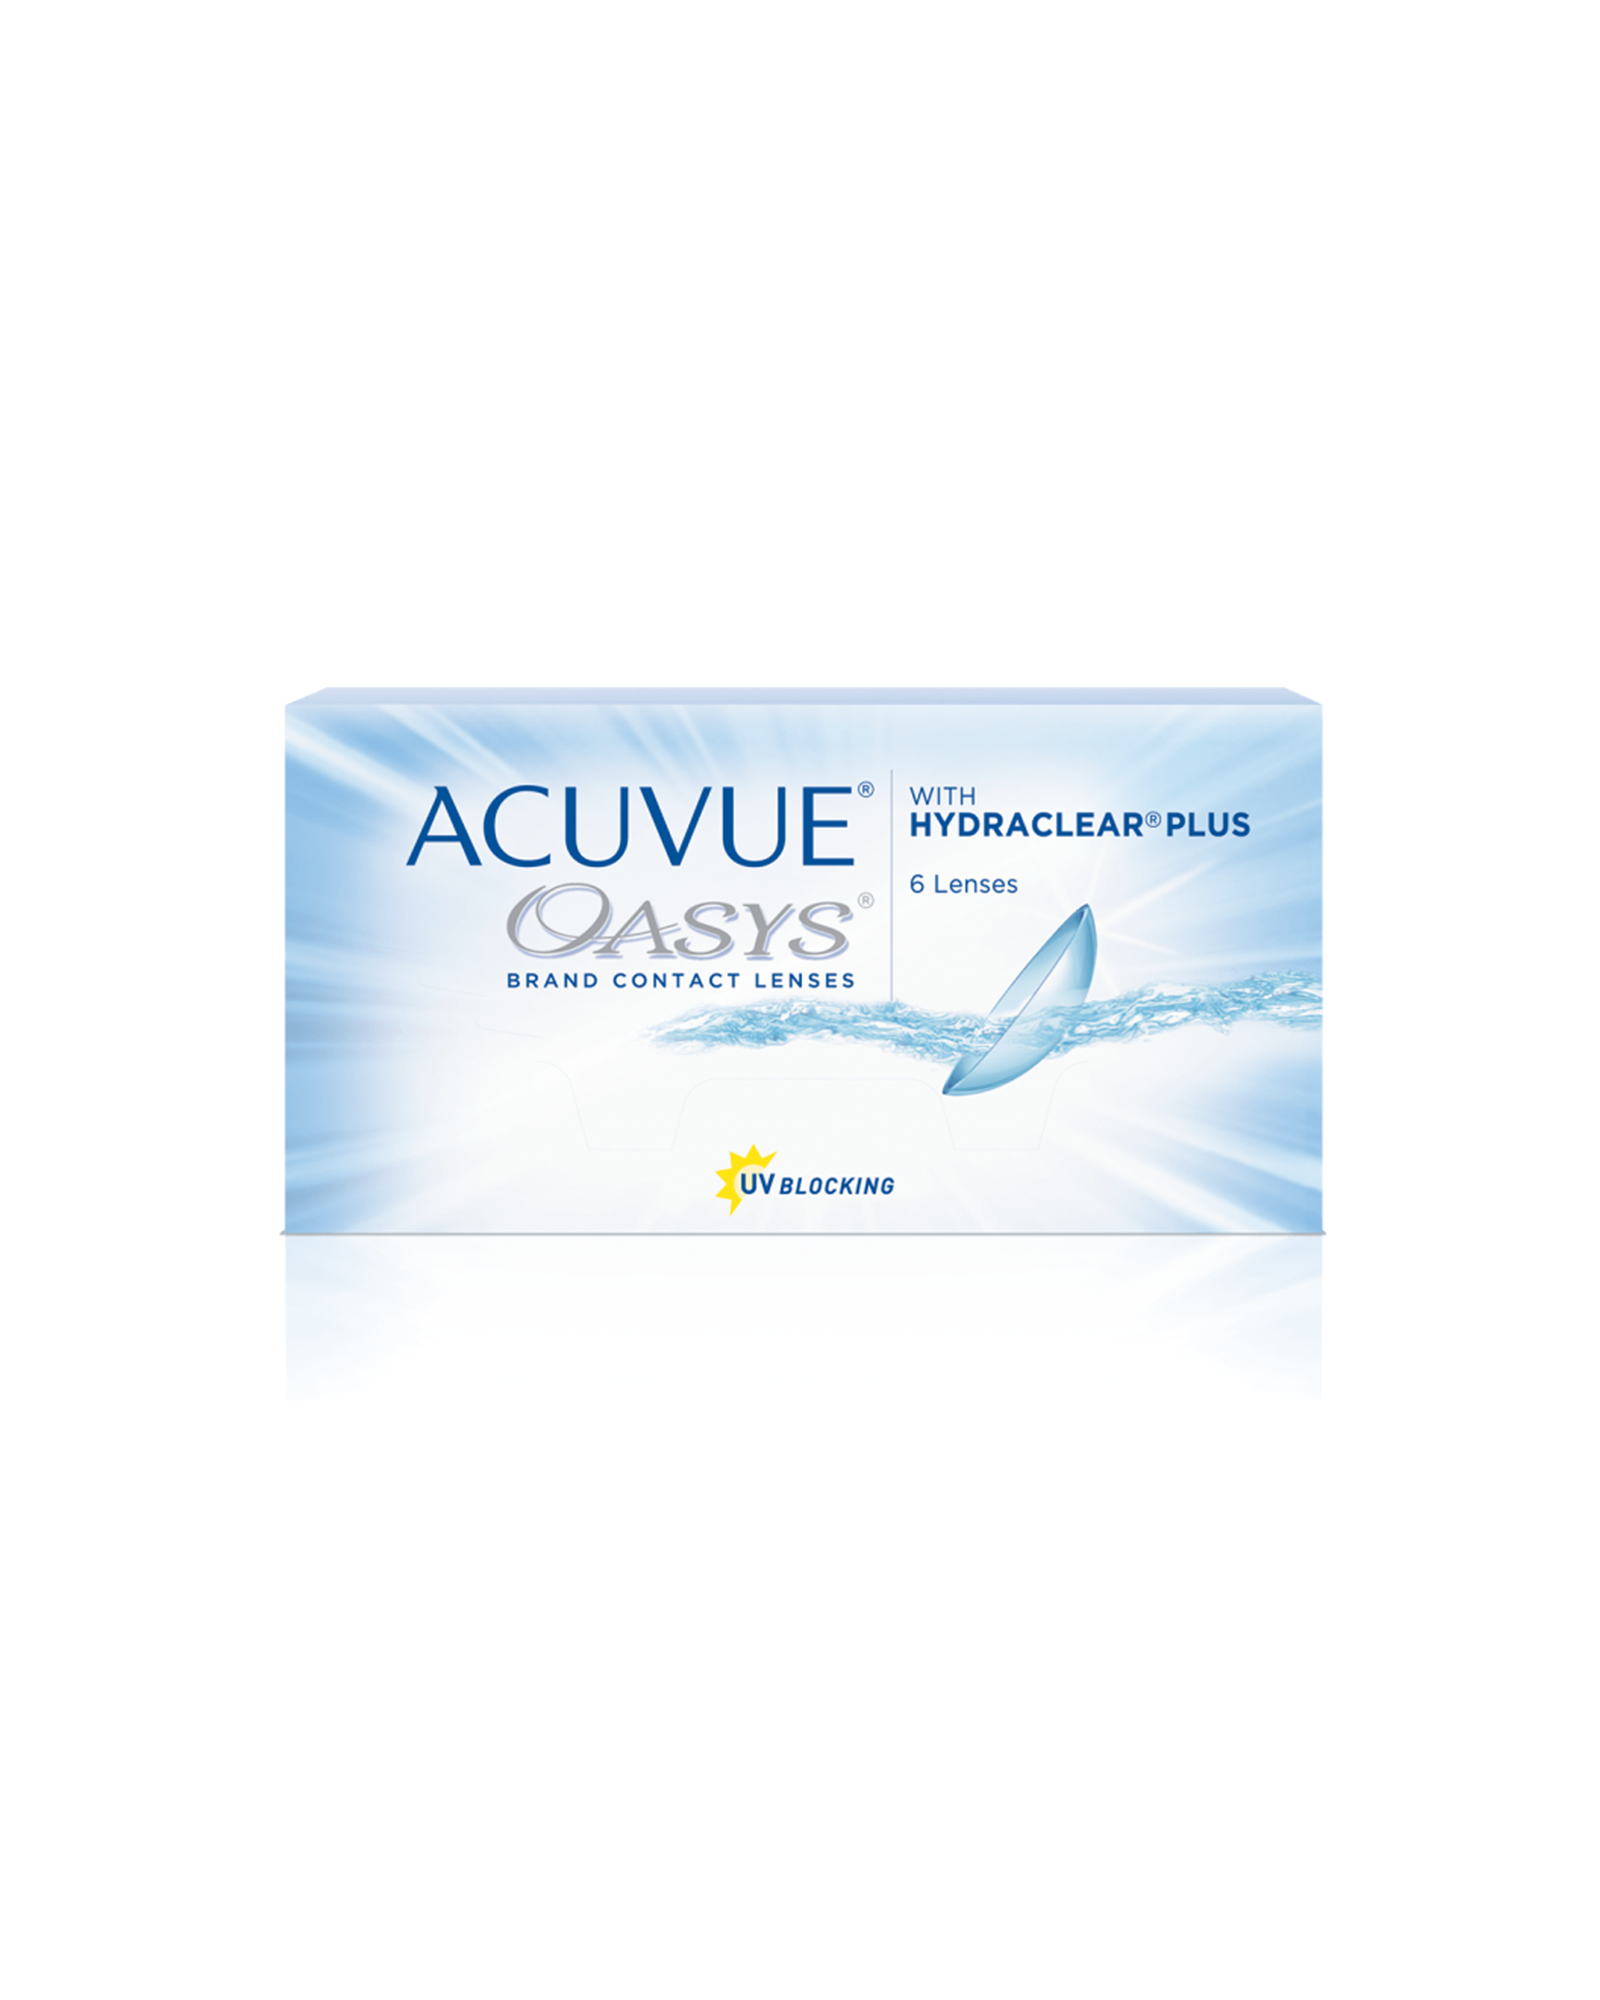 ACUVUE® OASYS BI-WEEKLY - Eleven Eleven Contact Lens and Vision Care Experts